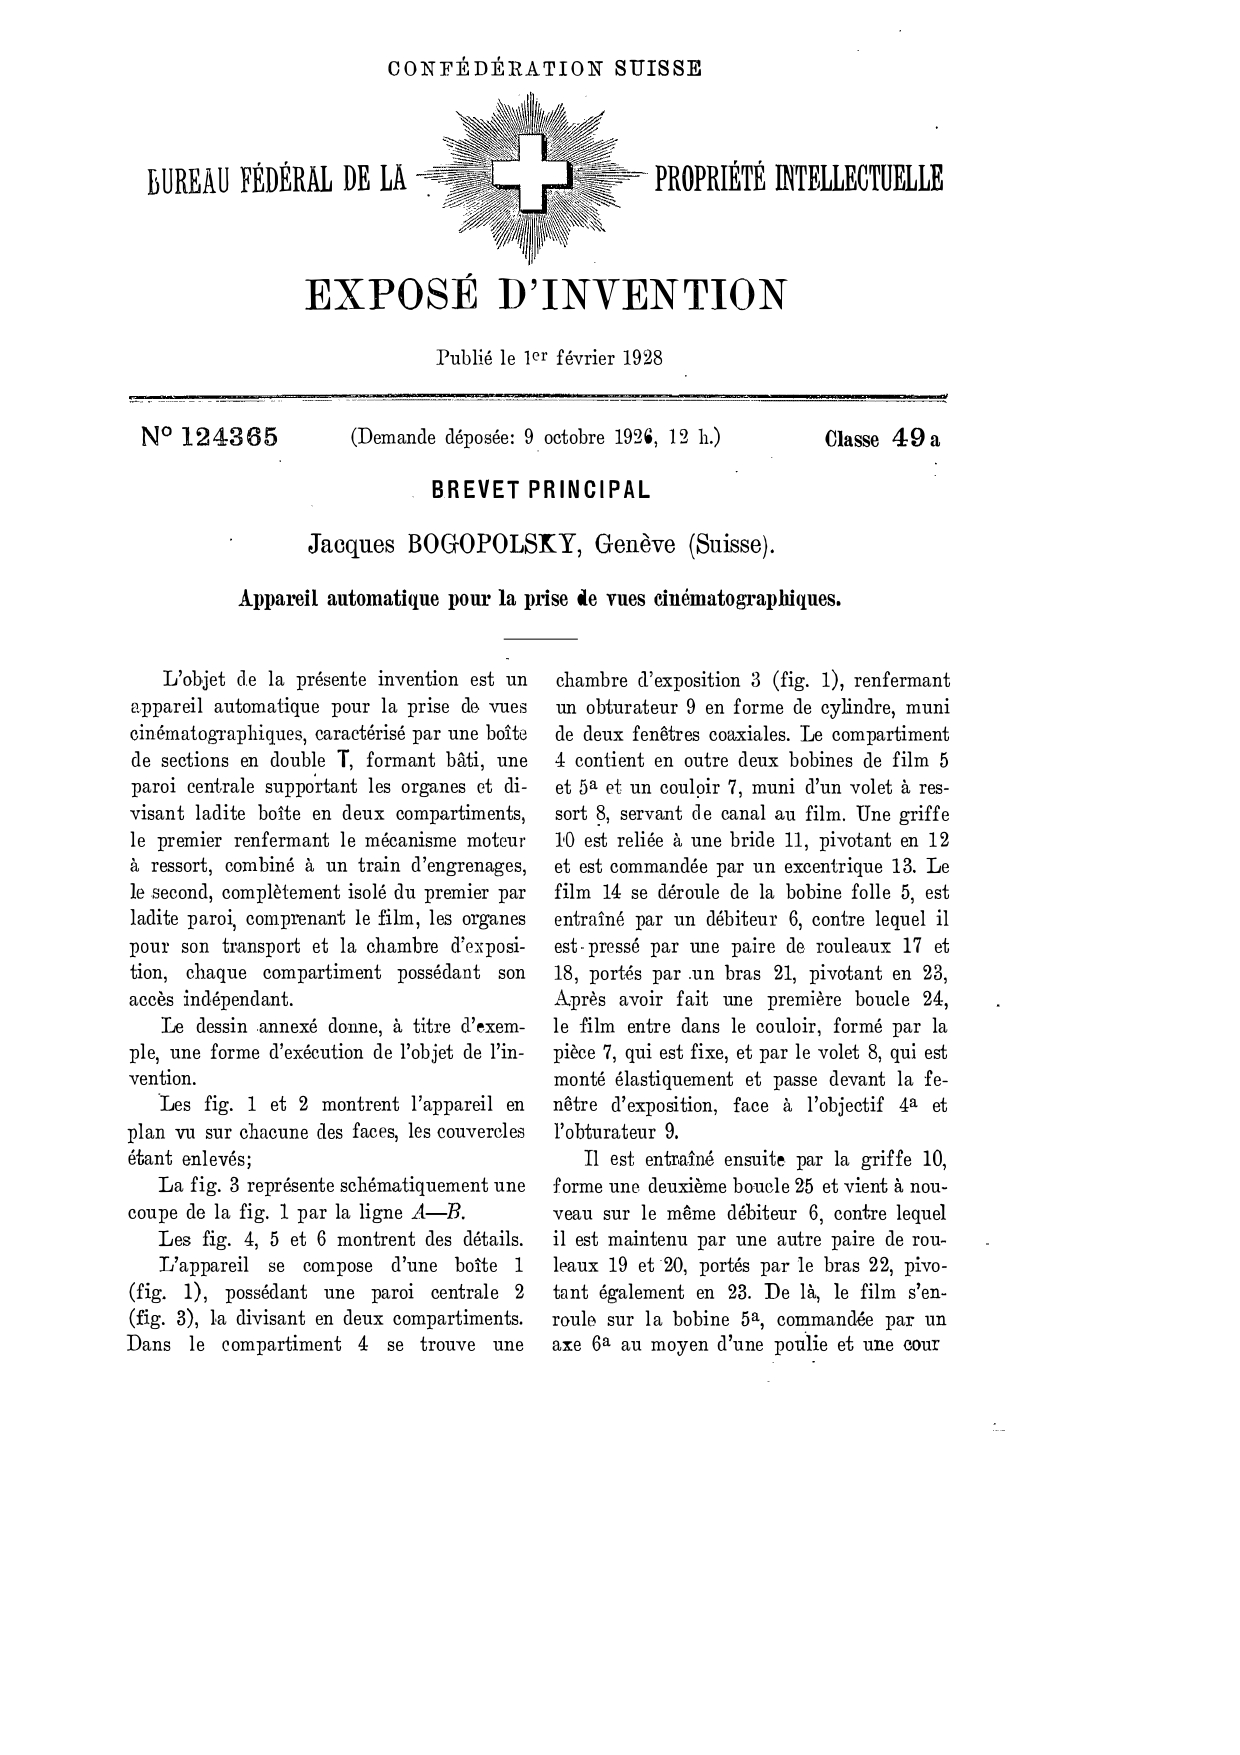 Page one of the patent—called an exposé d’invention [invention statement]—for the camera that would later become the Auto Ciné Model A. It features Bogopolsky’s name, the patent number, the place and the date. The remainder of the page contains a description of the camera.